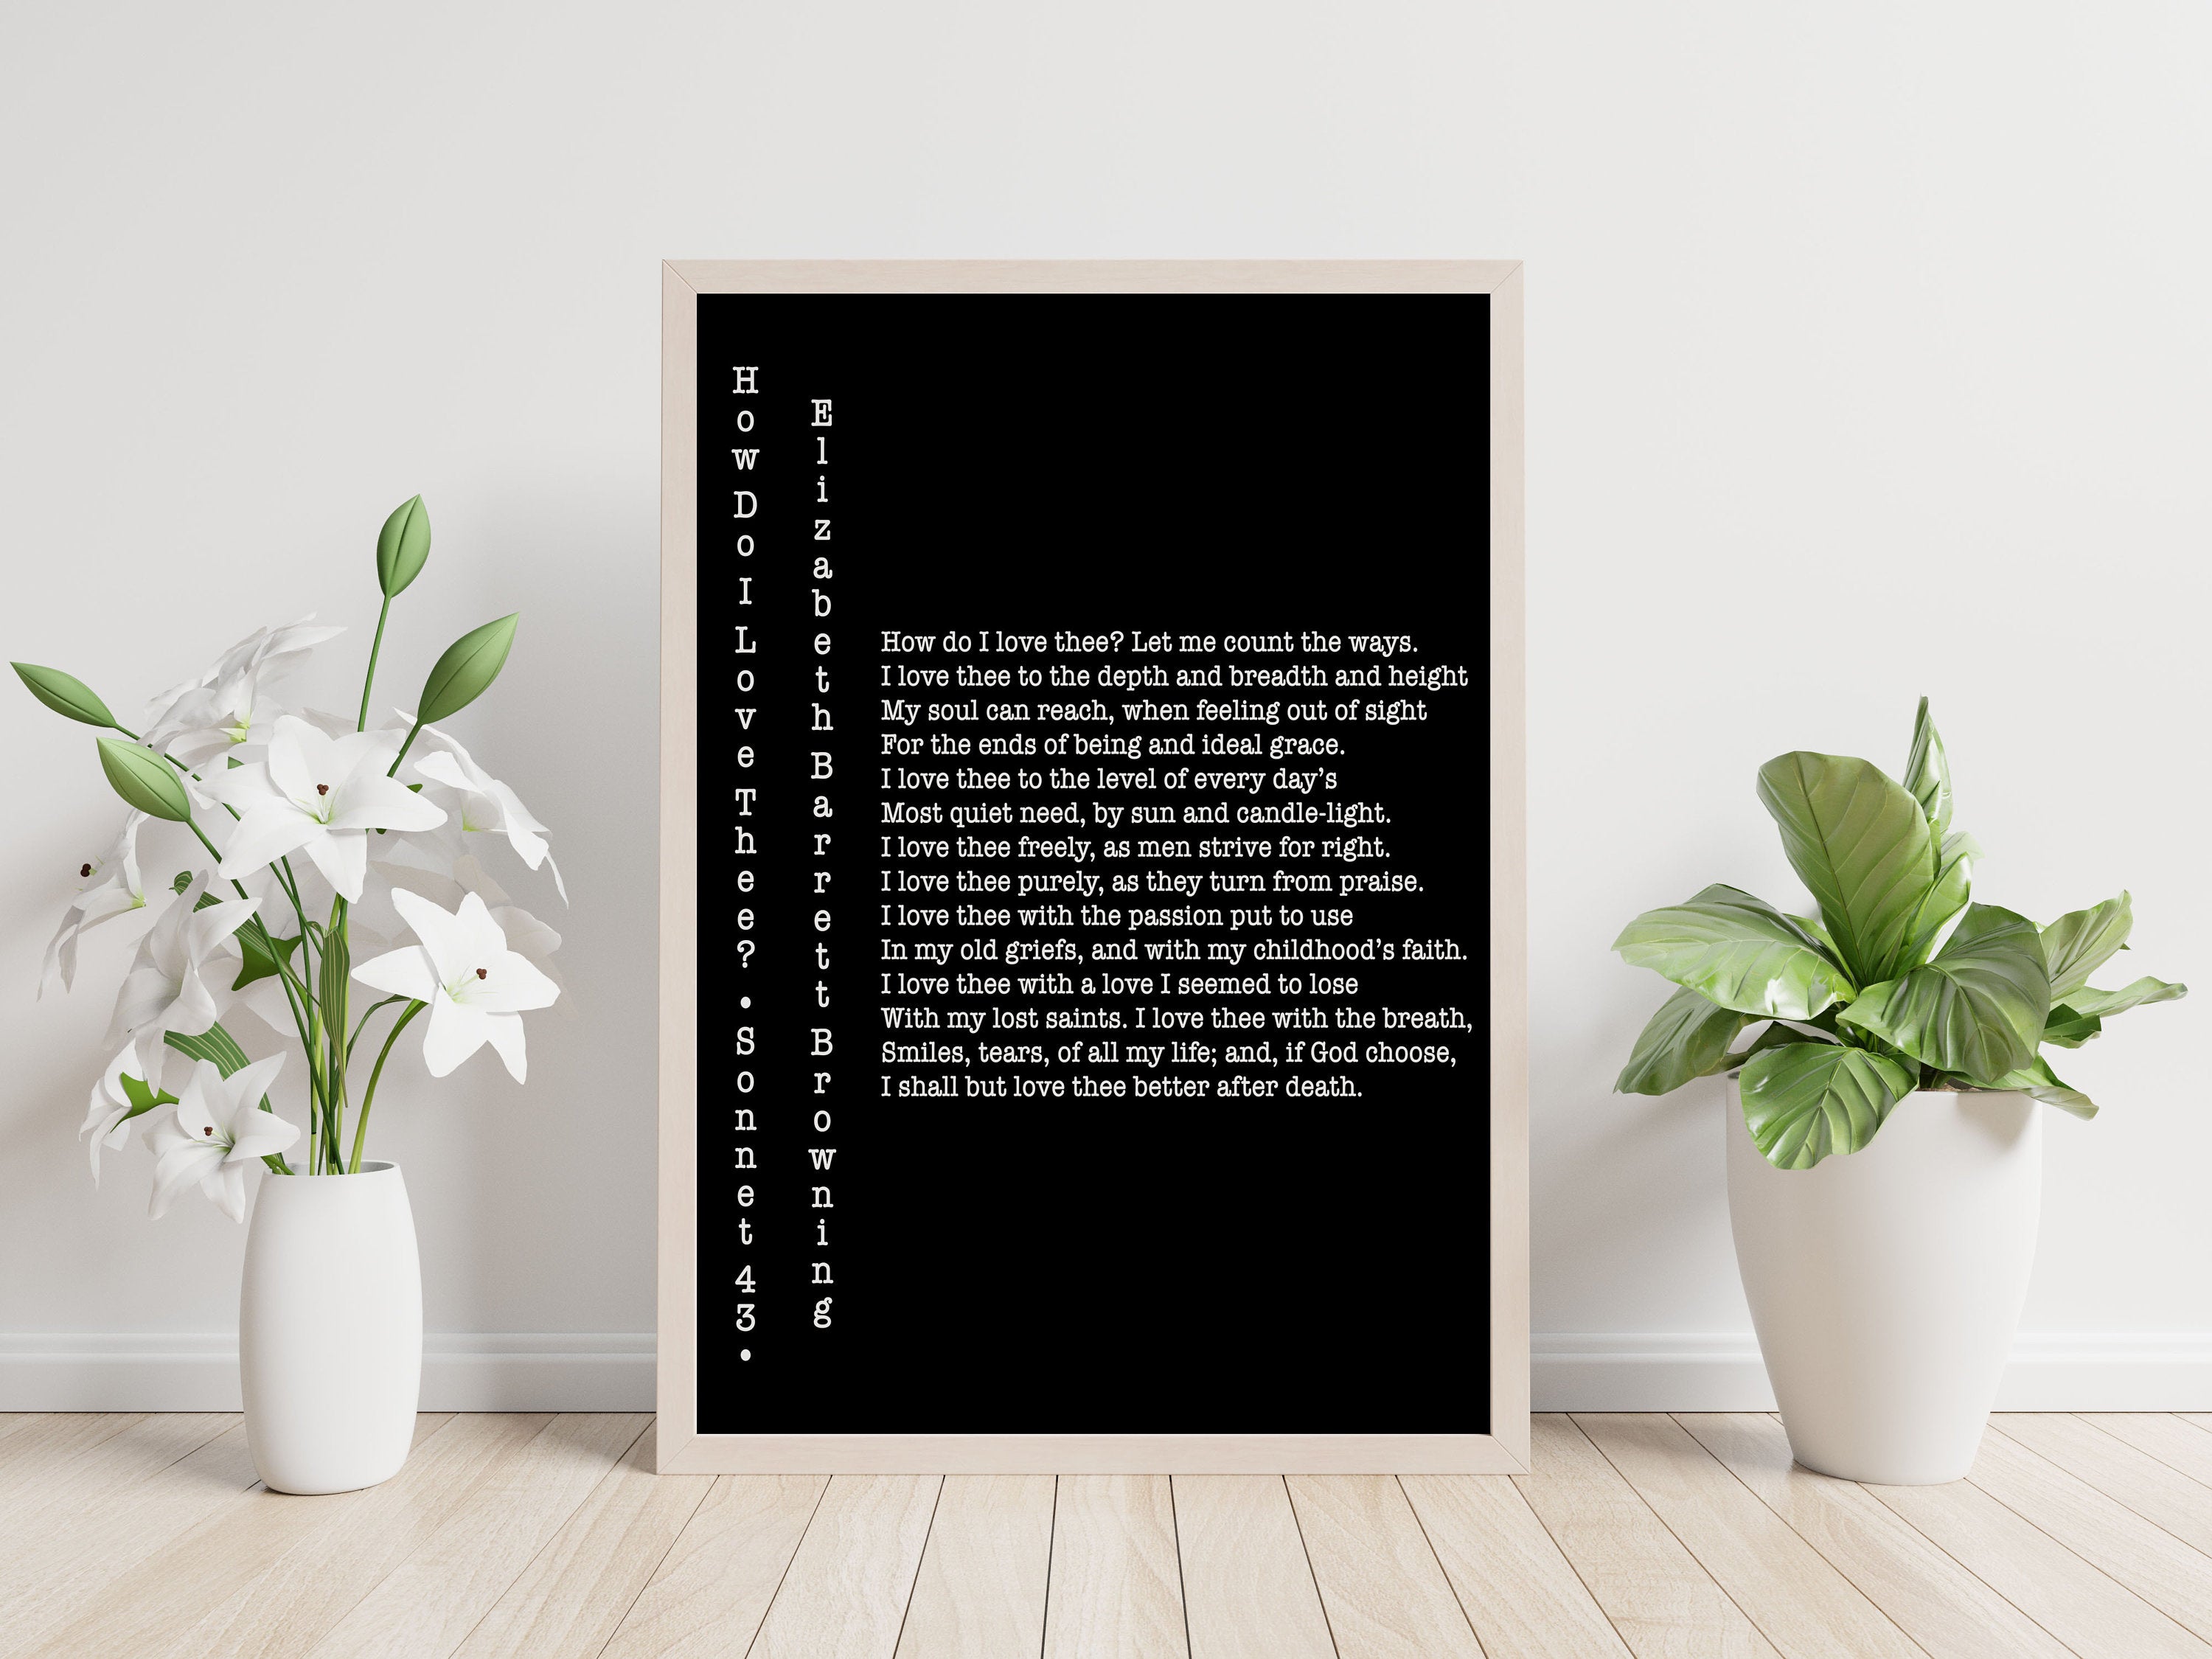 How Do I Love Thee Elizabeth Barrett Browning Unframed Wall Art Prints in Black & White, Sonnets from the Portuguese 43